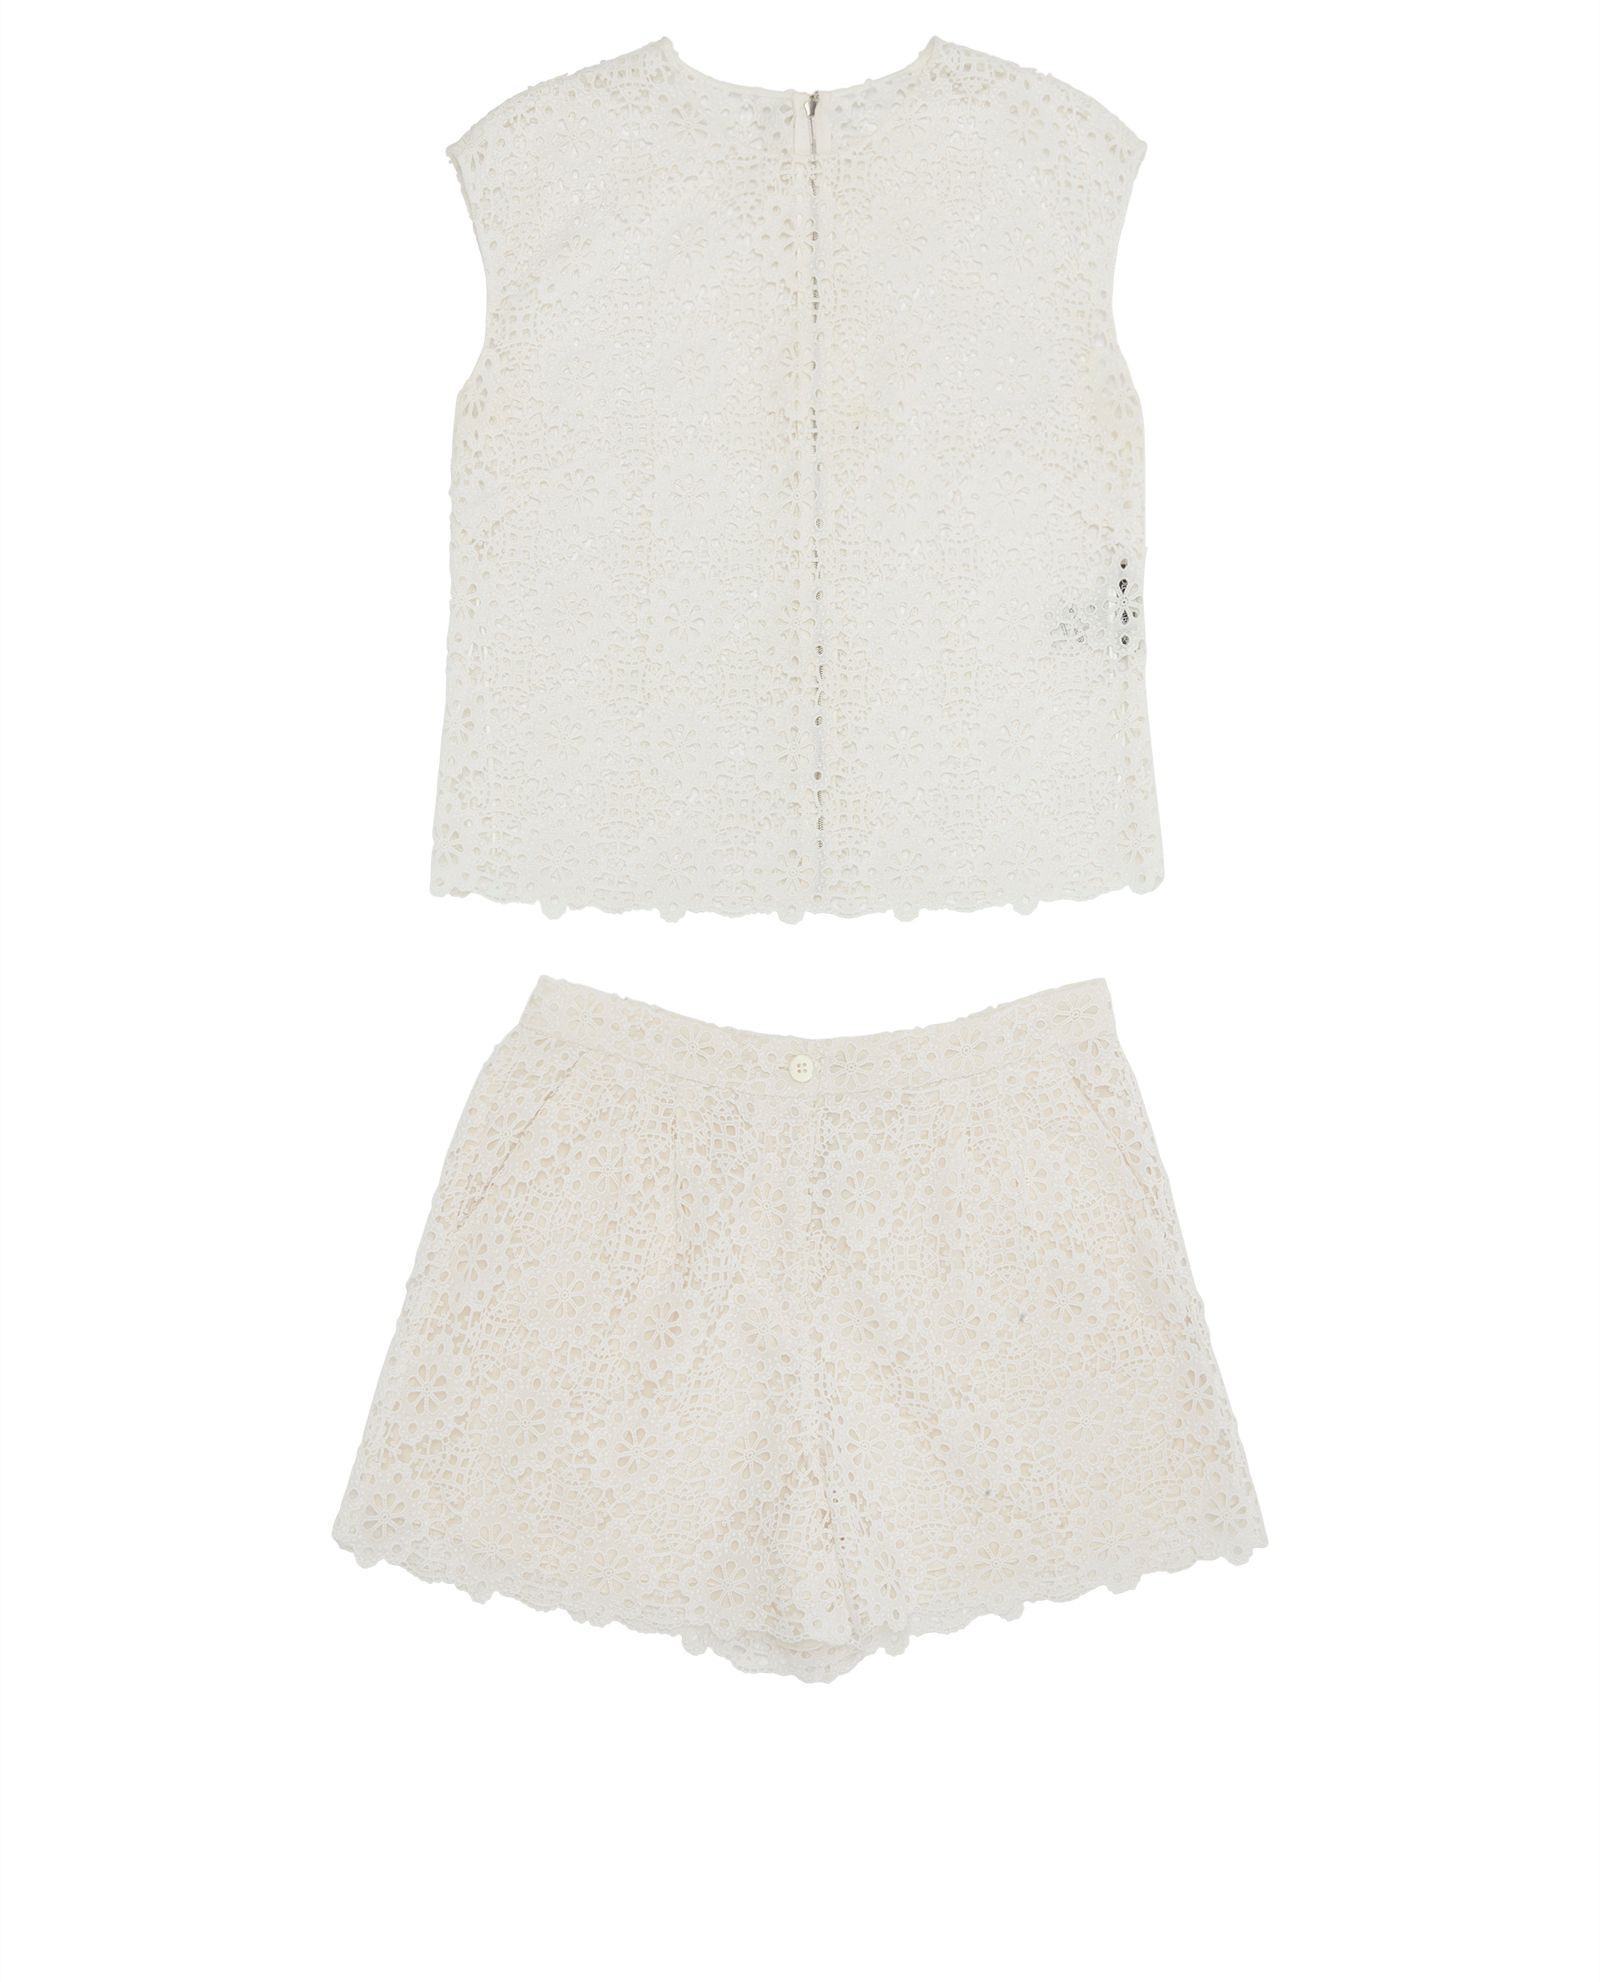 Dolce & Gabbana Cut Out Shorts and Top Co-ord, Co-Ords - Designer Exchange  | Buy Sell Exchange